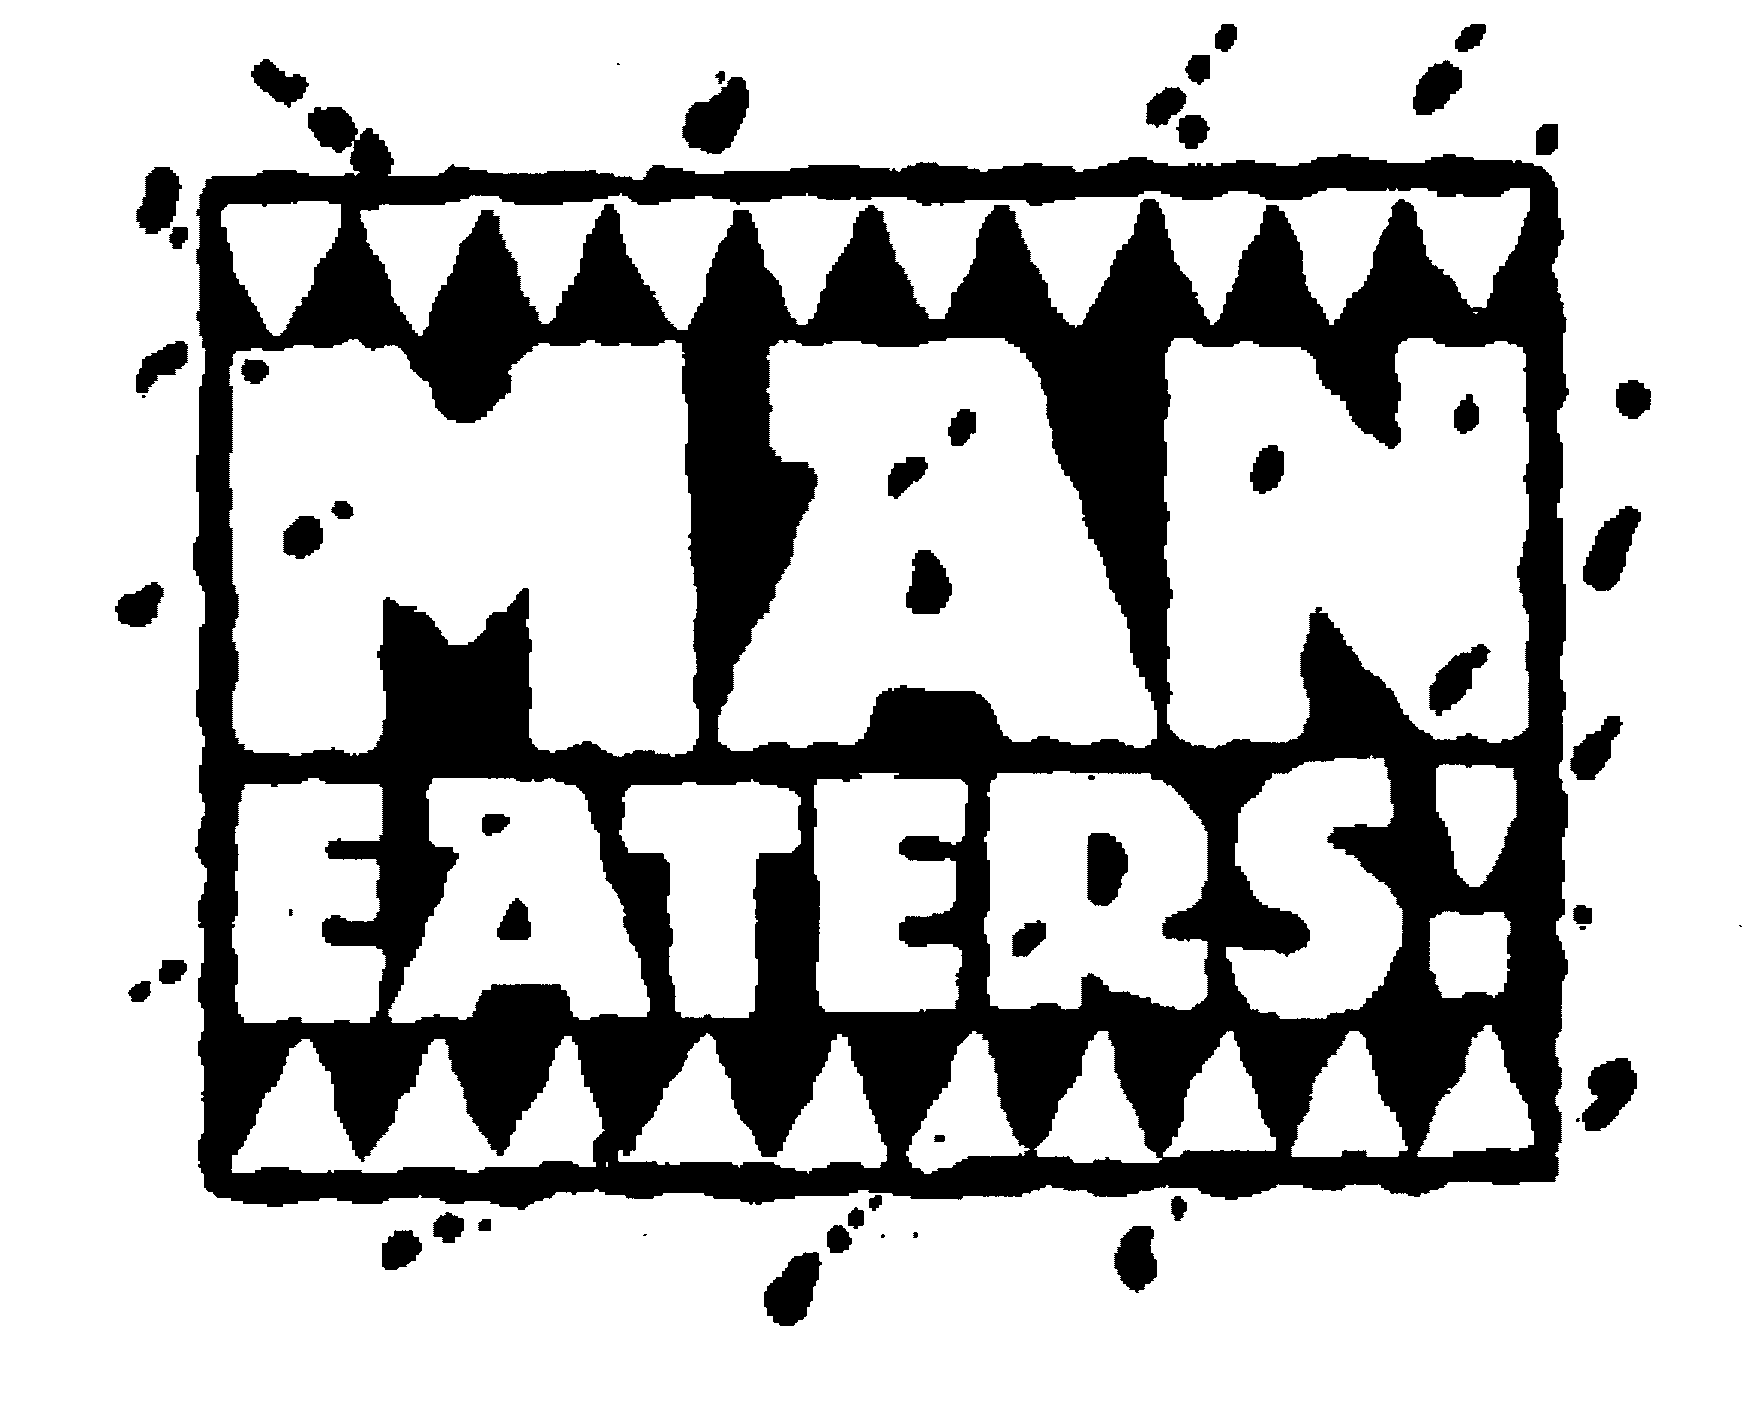  MANEATERS!